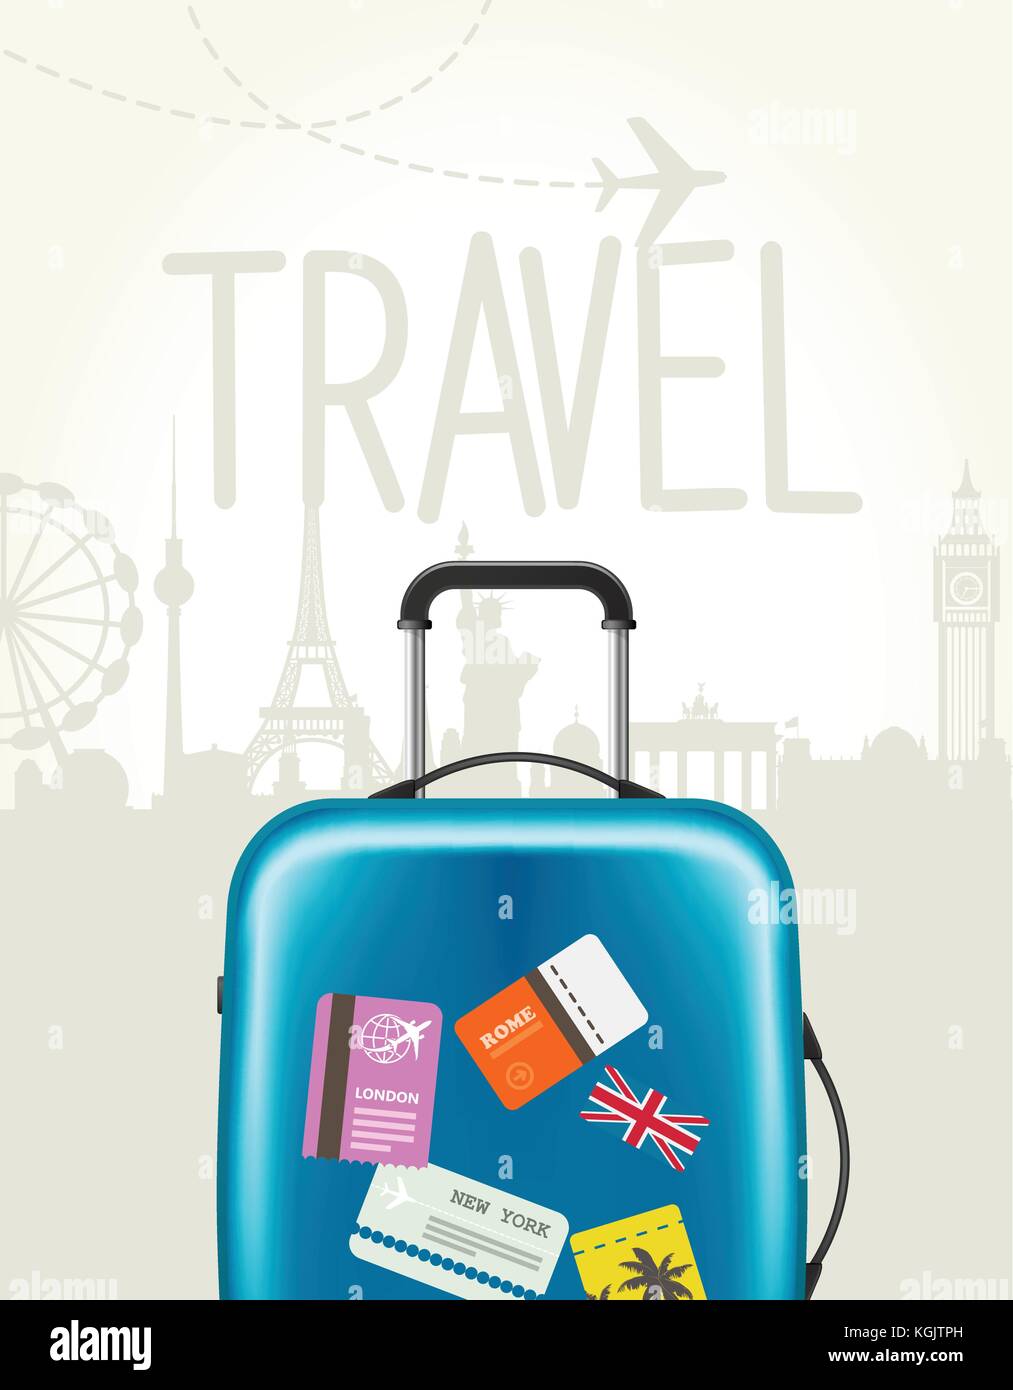 Travel around the world - modern suitcase with travel tags Stock Vector